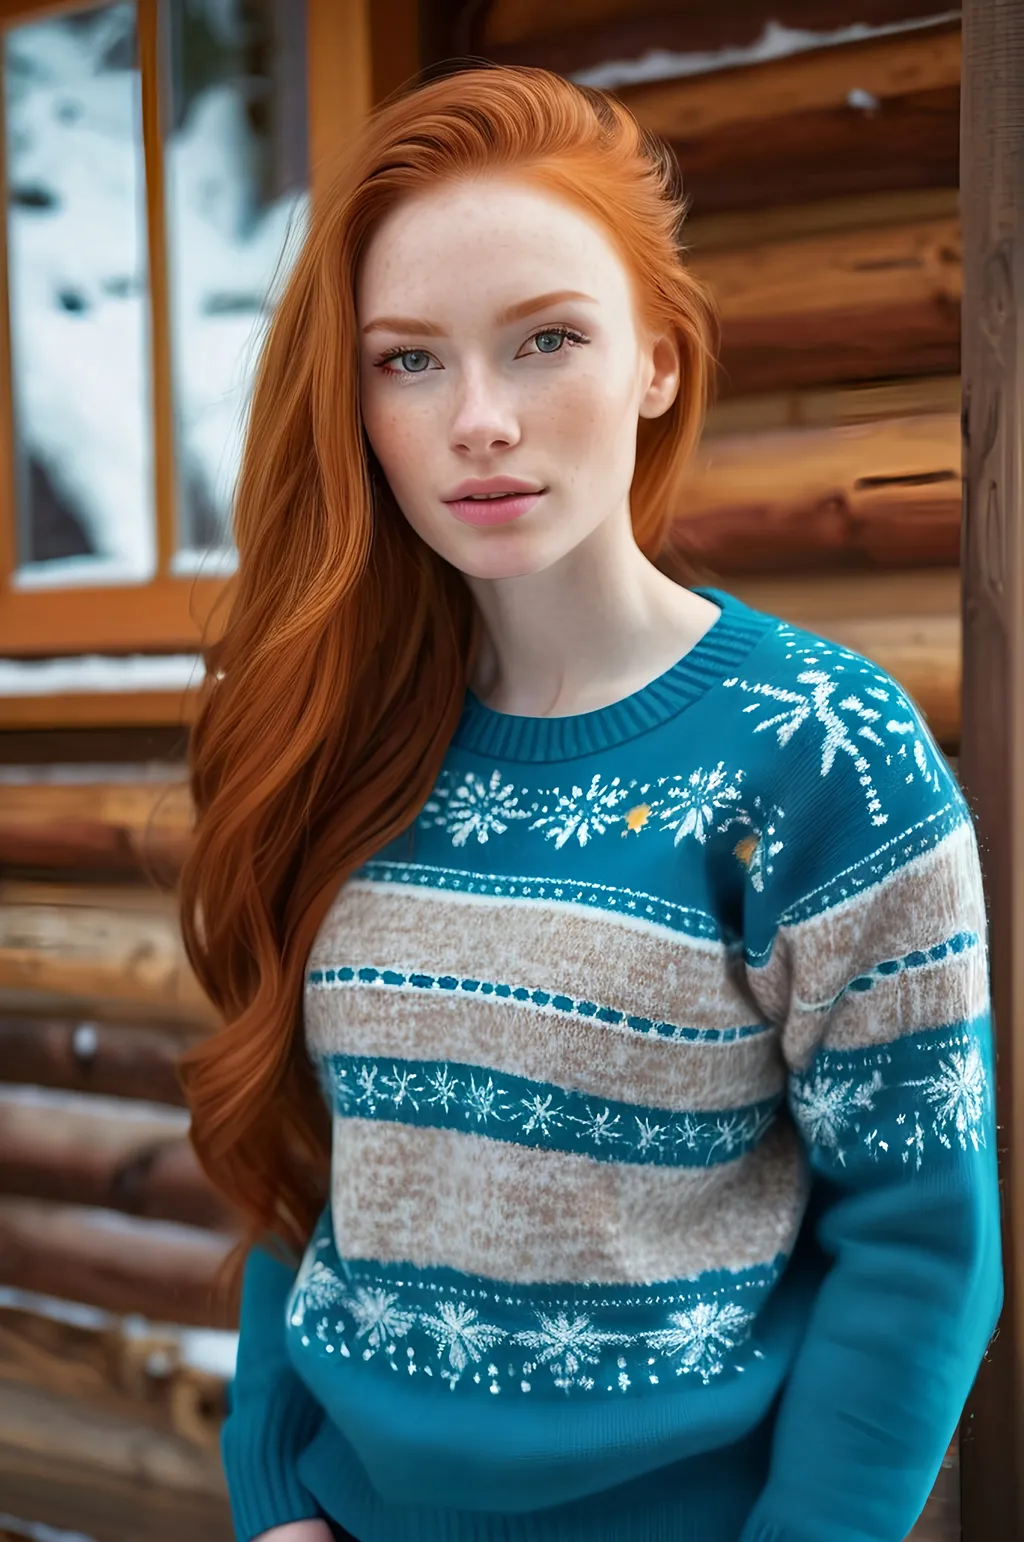 Prompt: Extremely beautiful woman, detailed extremely long ginger hair, flawless skin, detailed eyes, natural beauty, form-fitting seasonal sweater, cozy modern log cabin interior background, winter season, realistic professional photography, high quality, detailed, realistic, cozy, ginger, long hair, flawless skin, candid moment, modern log cabin, seasonal sweater, detailed eyes, natural beauty, professional photography, winter season, cozy lighting